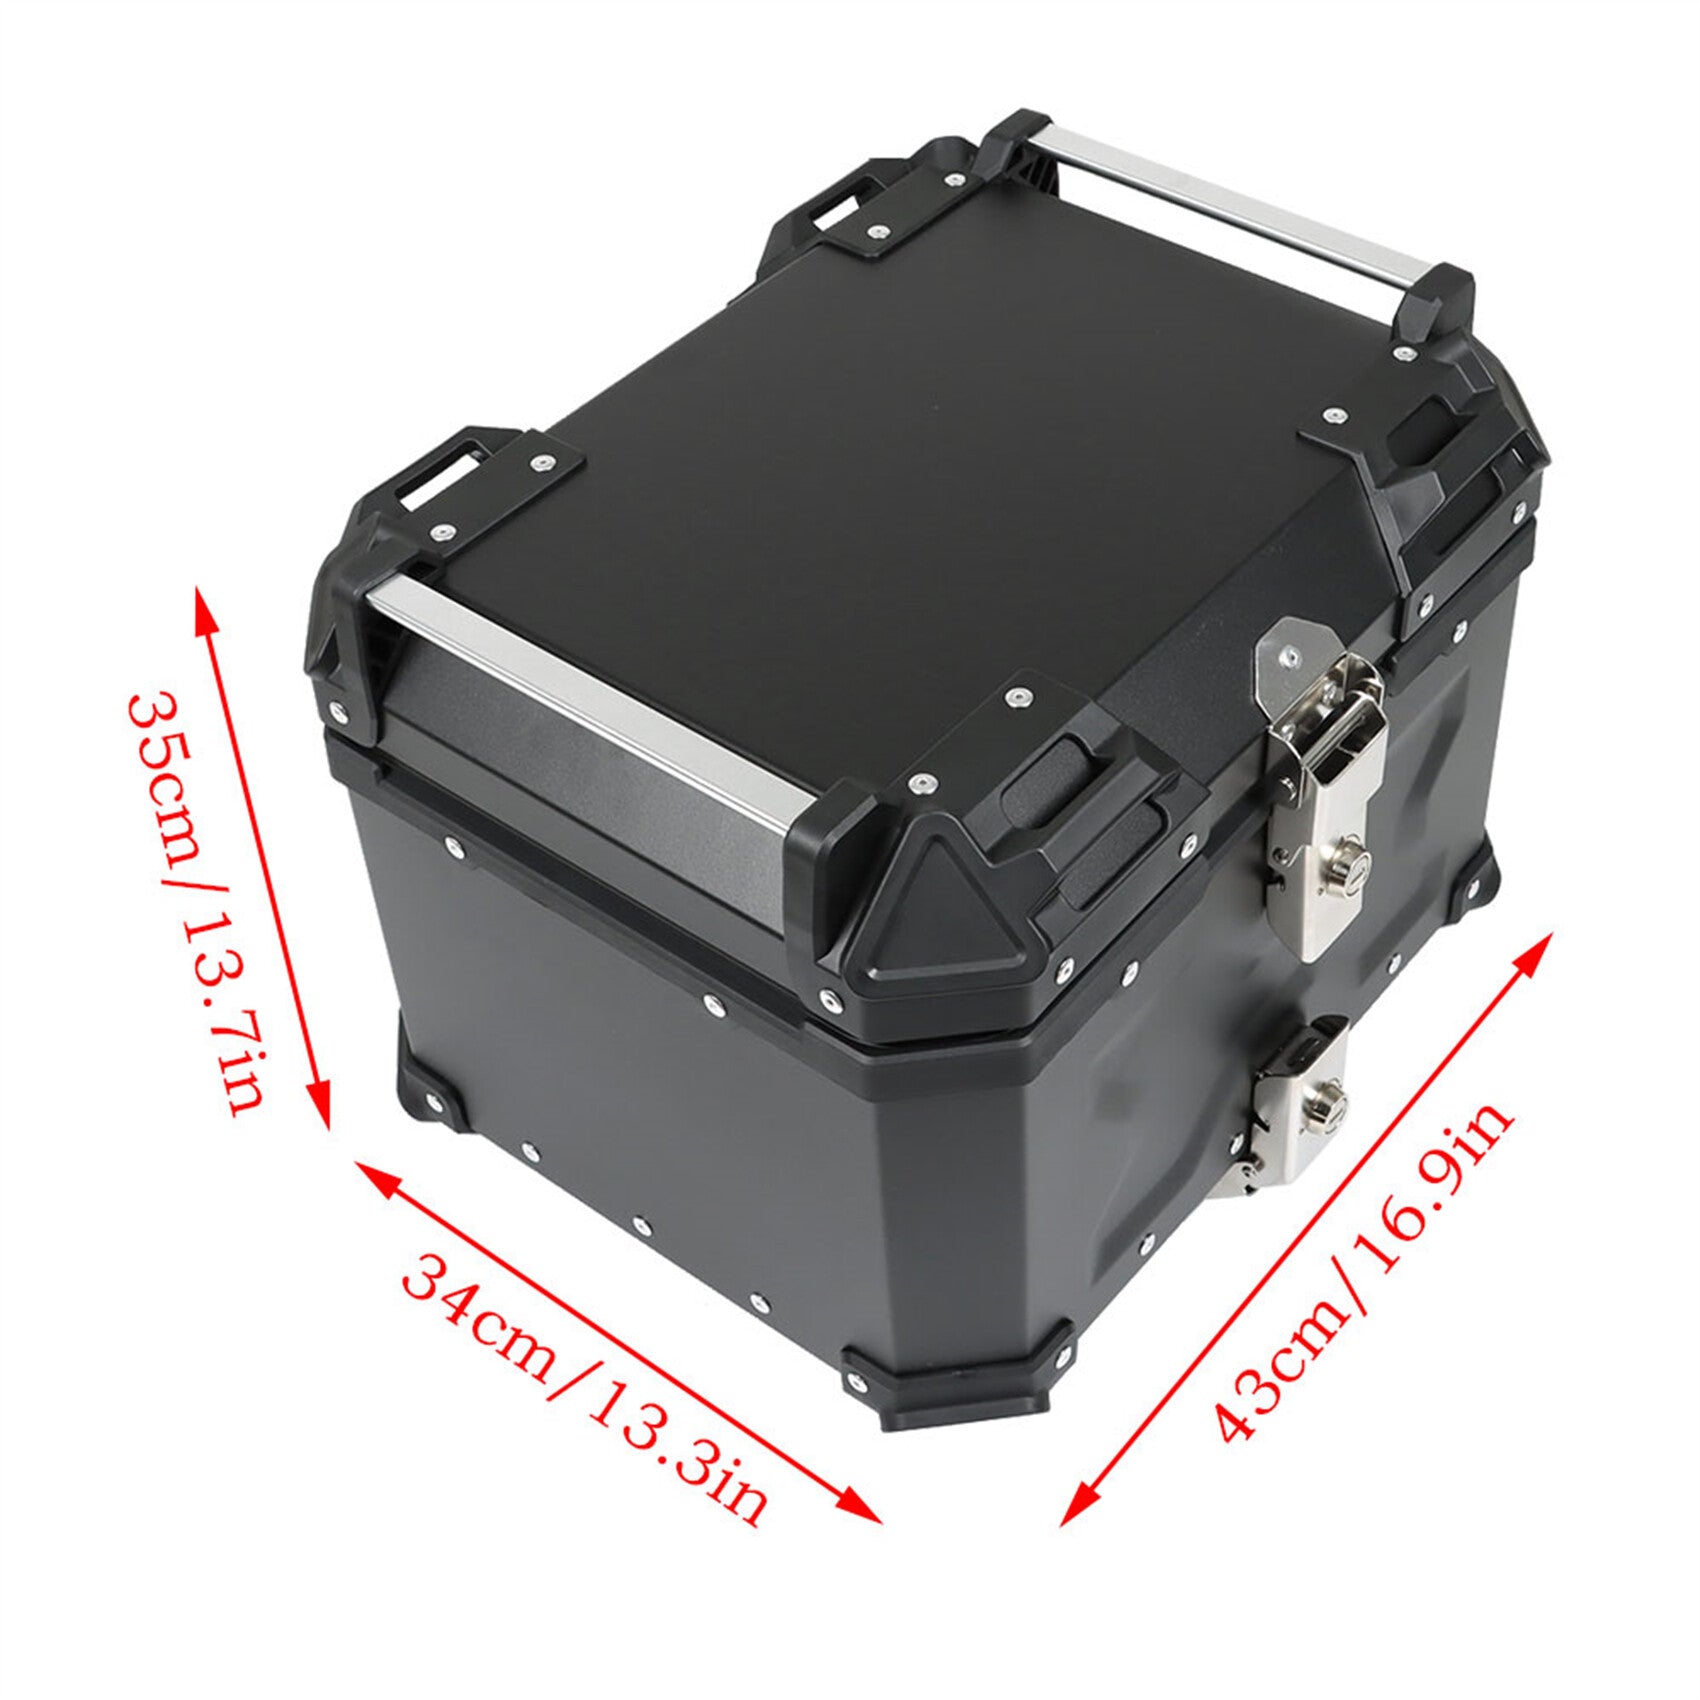 labwork 45L Motorcycle Top Case Tail Box with Backrest and Mounting Plate Hard Aluminum Alloy Watertightness Security Lock Against Theft Black Metal Motorcycle Trunk Tour Tail Box